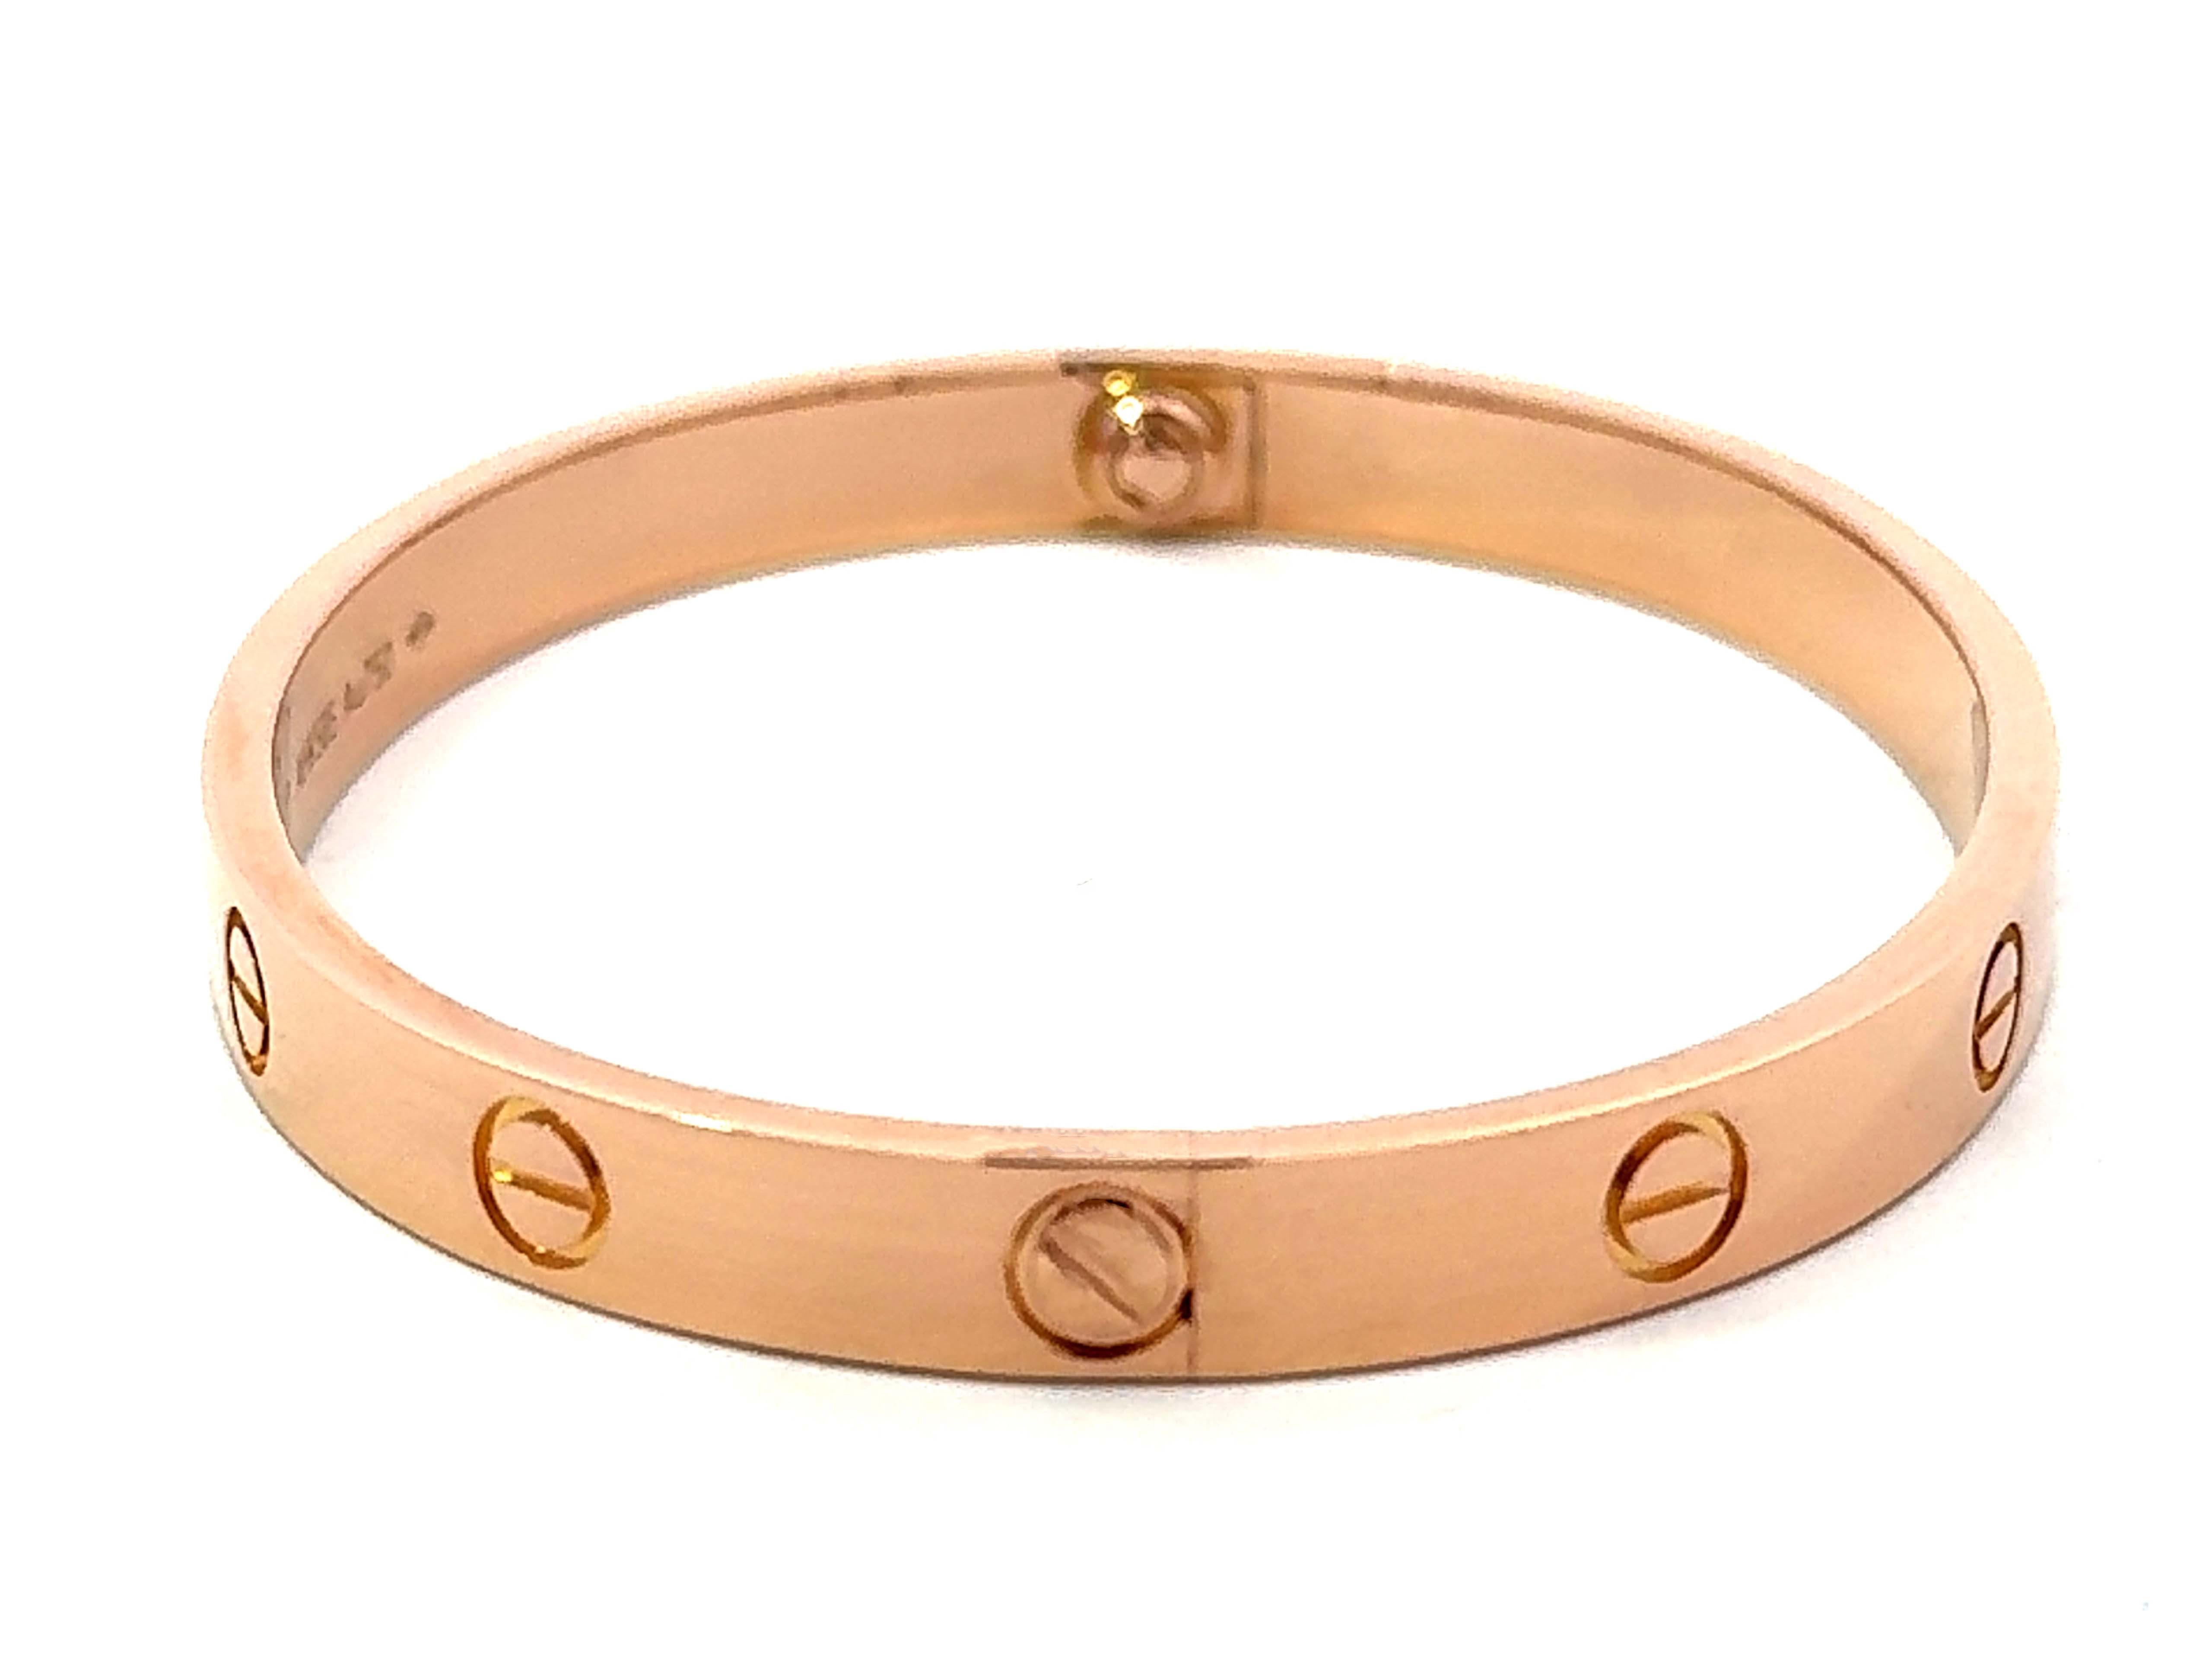 Cartier Love Bracelet in 18K Rose Gold Size 17 With Box and Papers For Sale 2